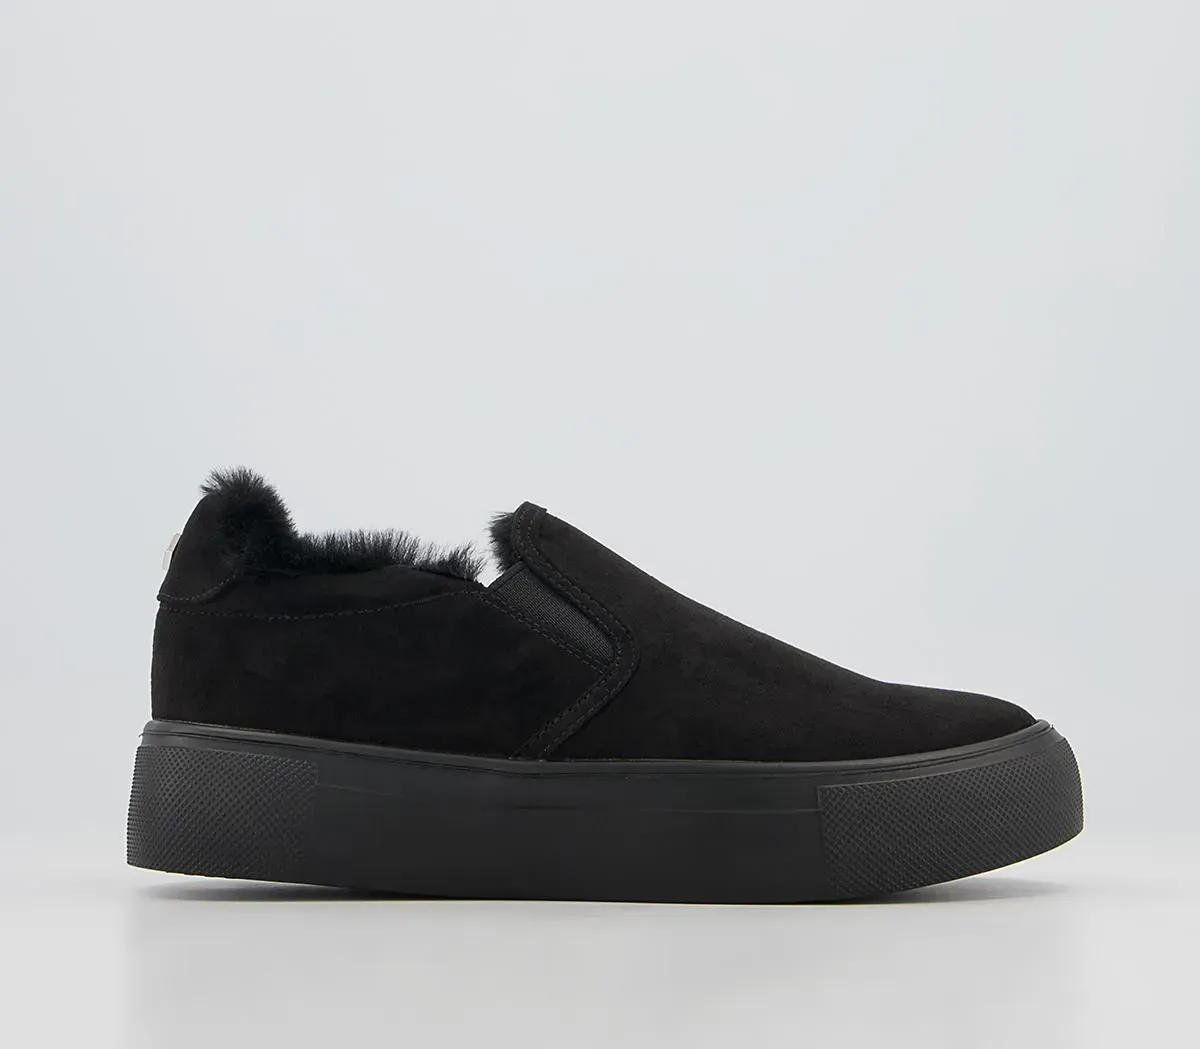 A black slip on shoe with black faux fur lining